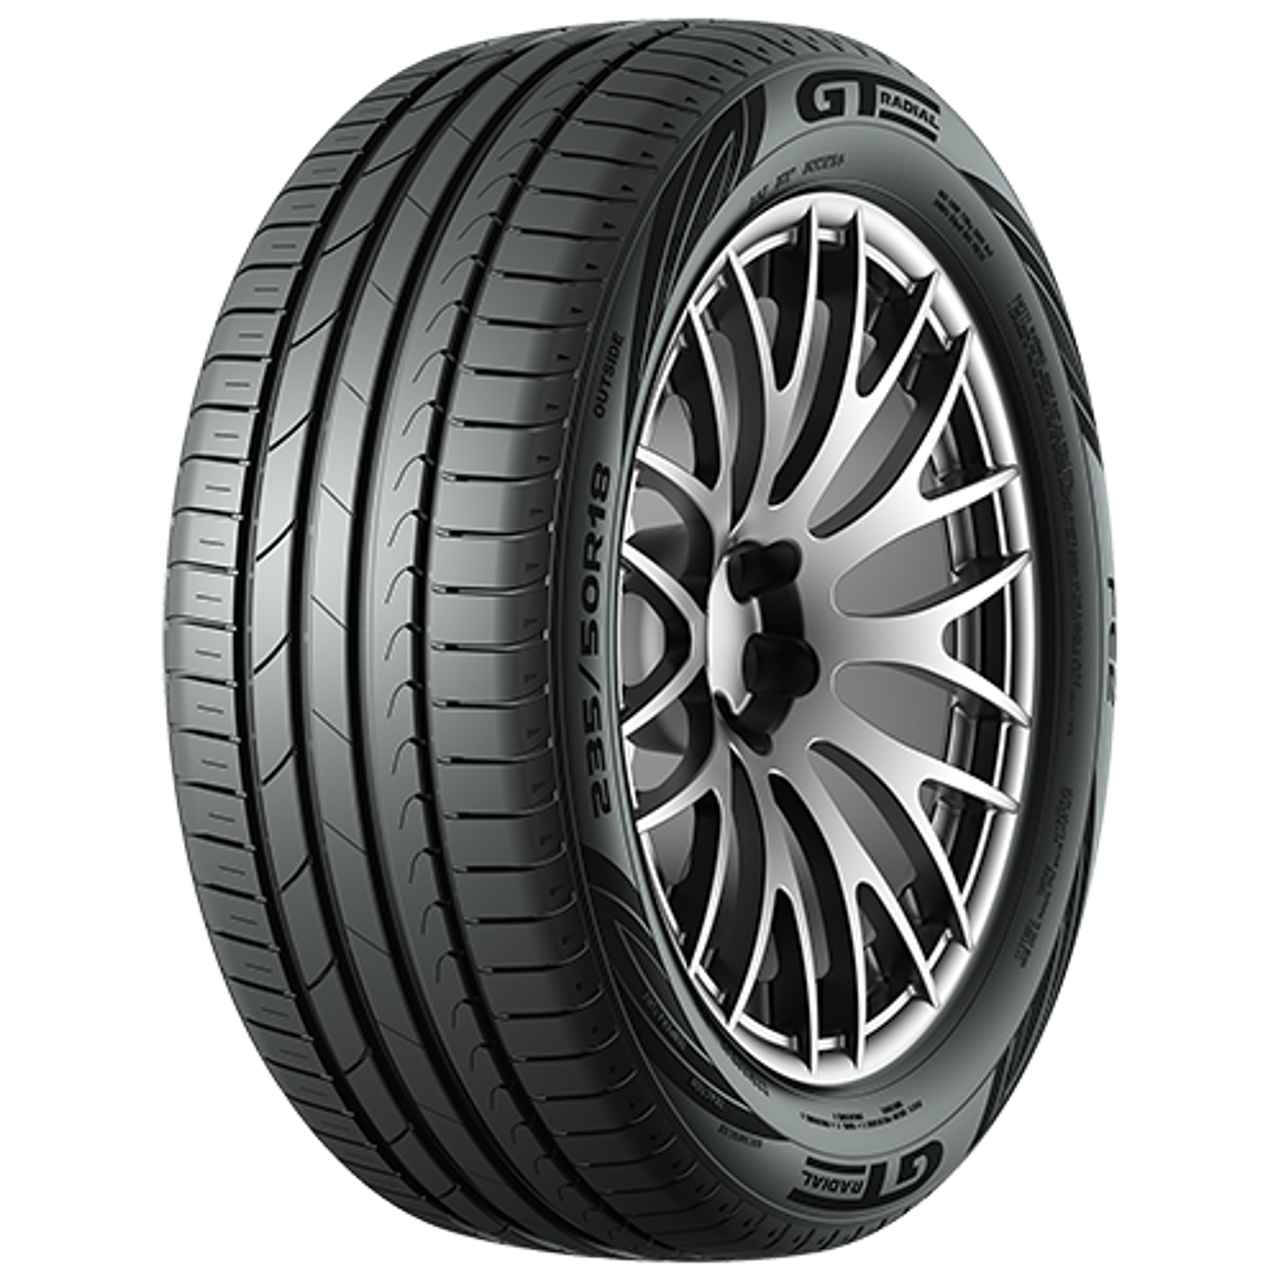 GT-RADIAL FE2 195/65R15 91H BSW